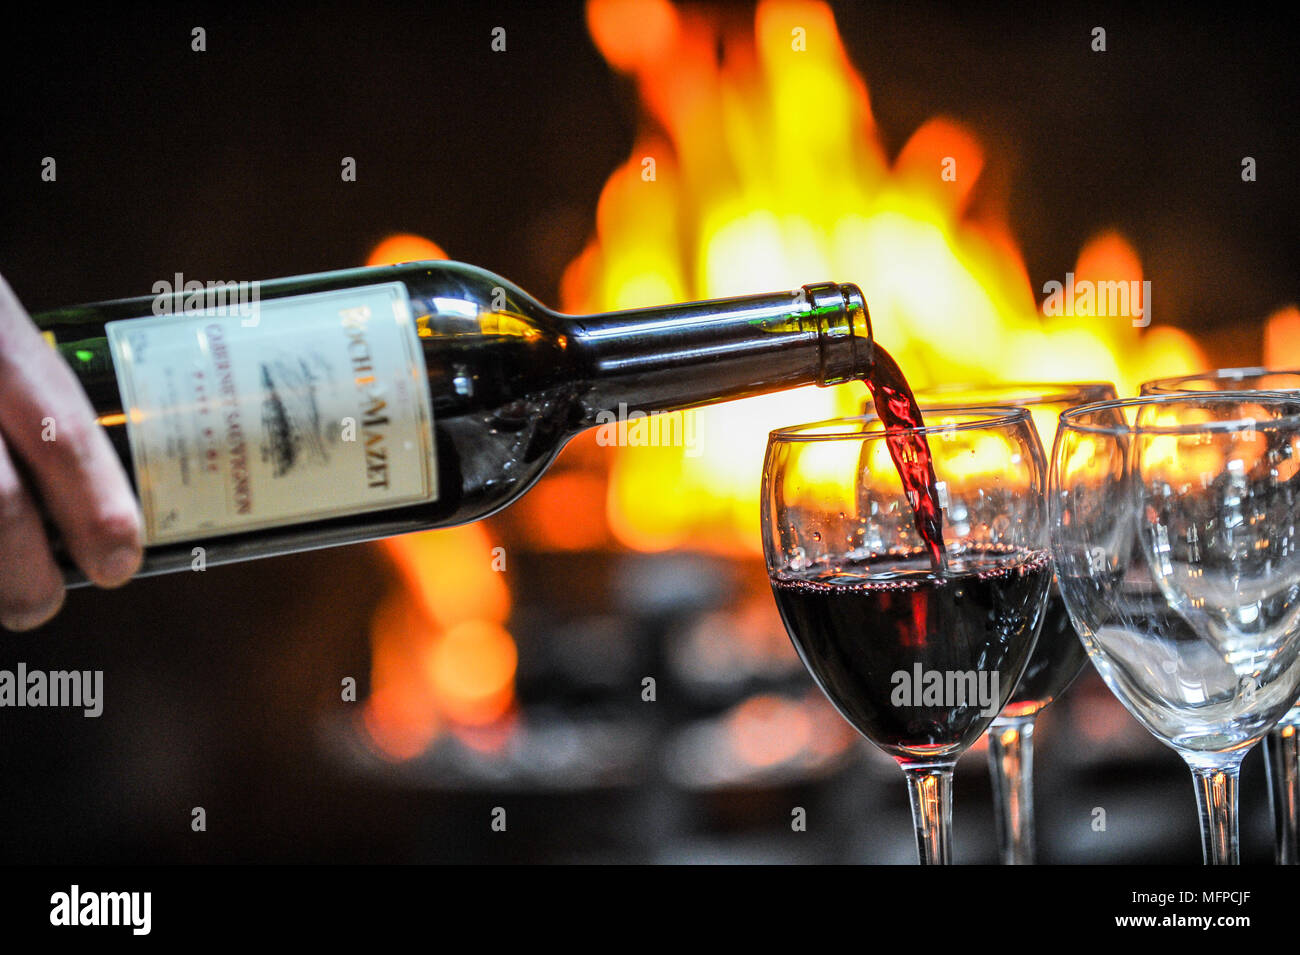 Red wine is poured into a glass in front of an open fire. Stock Photo